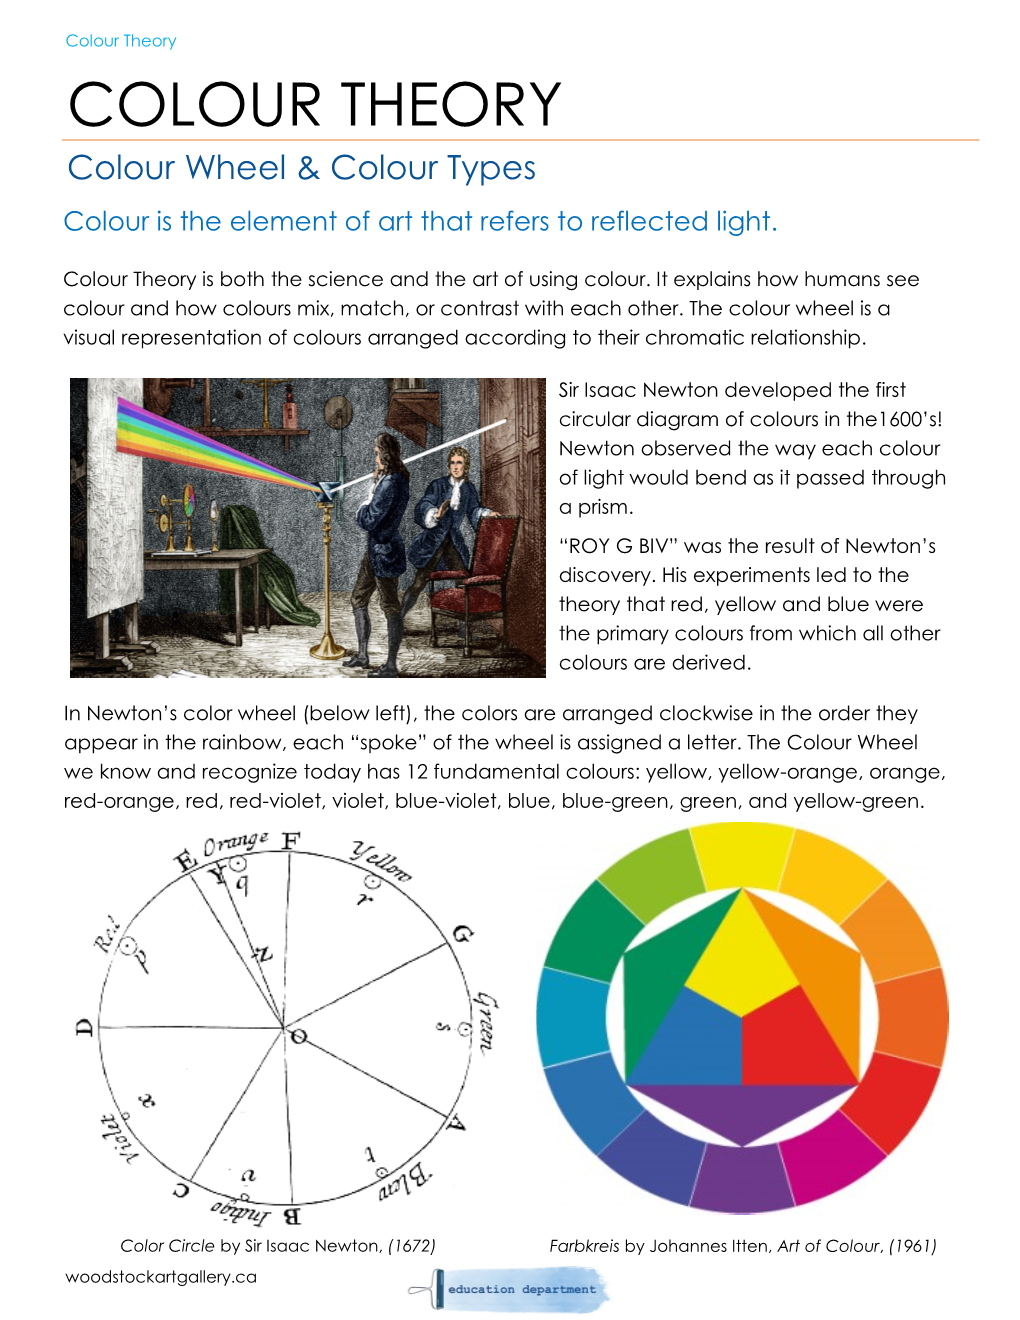 Colour Theory COLOUR THEORY Colour Wheel & Colour Types Colour Is the Element of Art That Refers to Reflected Light